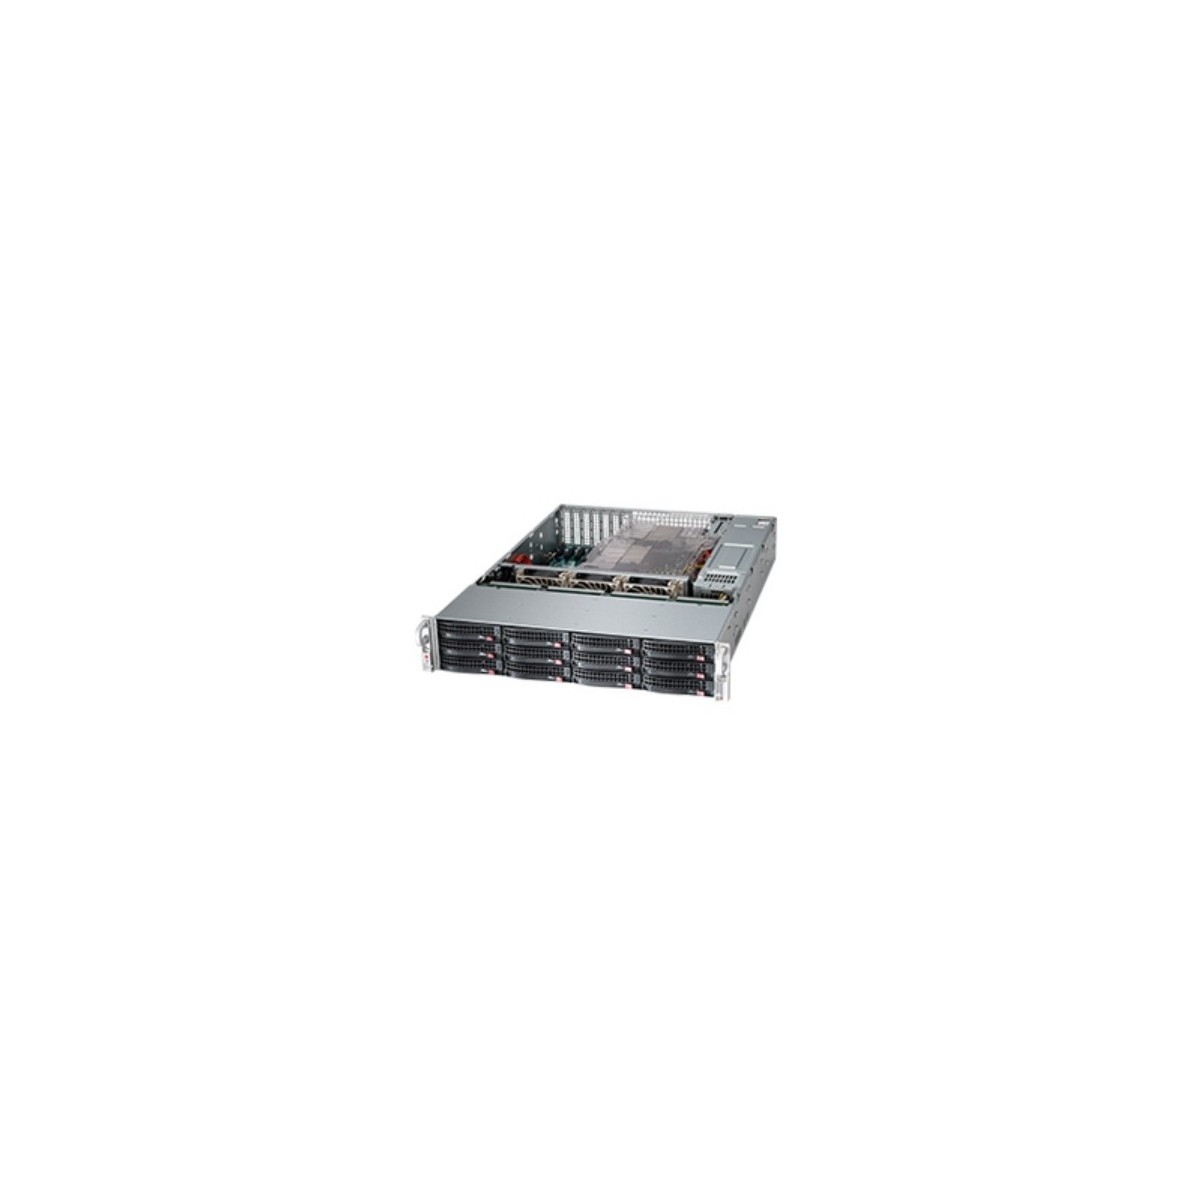 Supermicro chassis CSE-826BE1C4-R1K23LPB, 2U, Dual and Single Intel and AMD CPUs, 2.12 x 3.5" hot-swap SAS/SATA drive bay with S